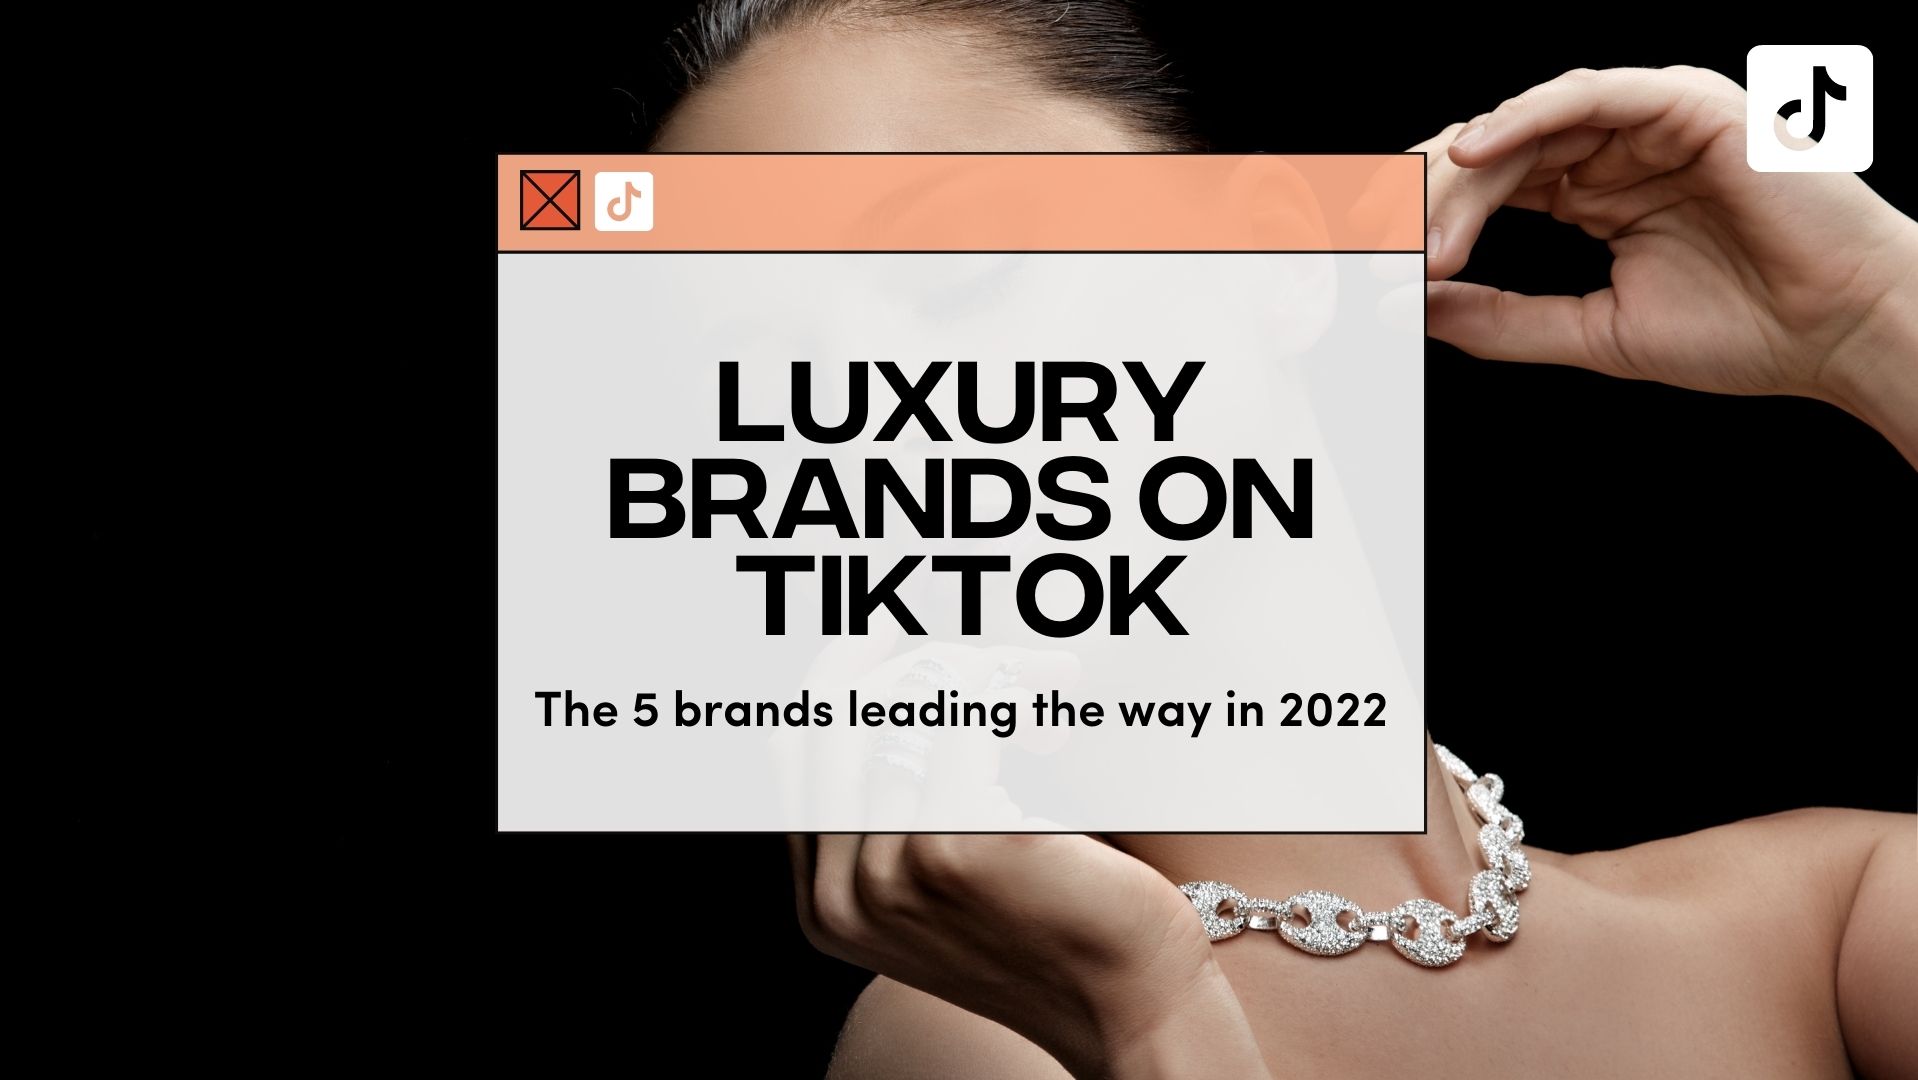 TikTokers Are Buying the #CheapestThing From Luxury Brands on The Viral  List - YPulse